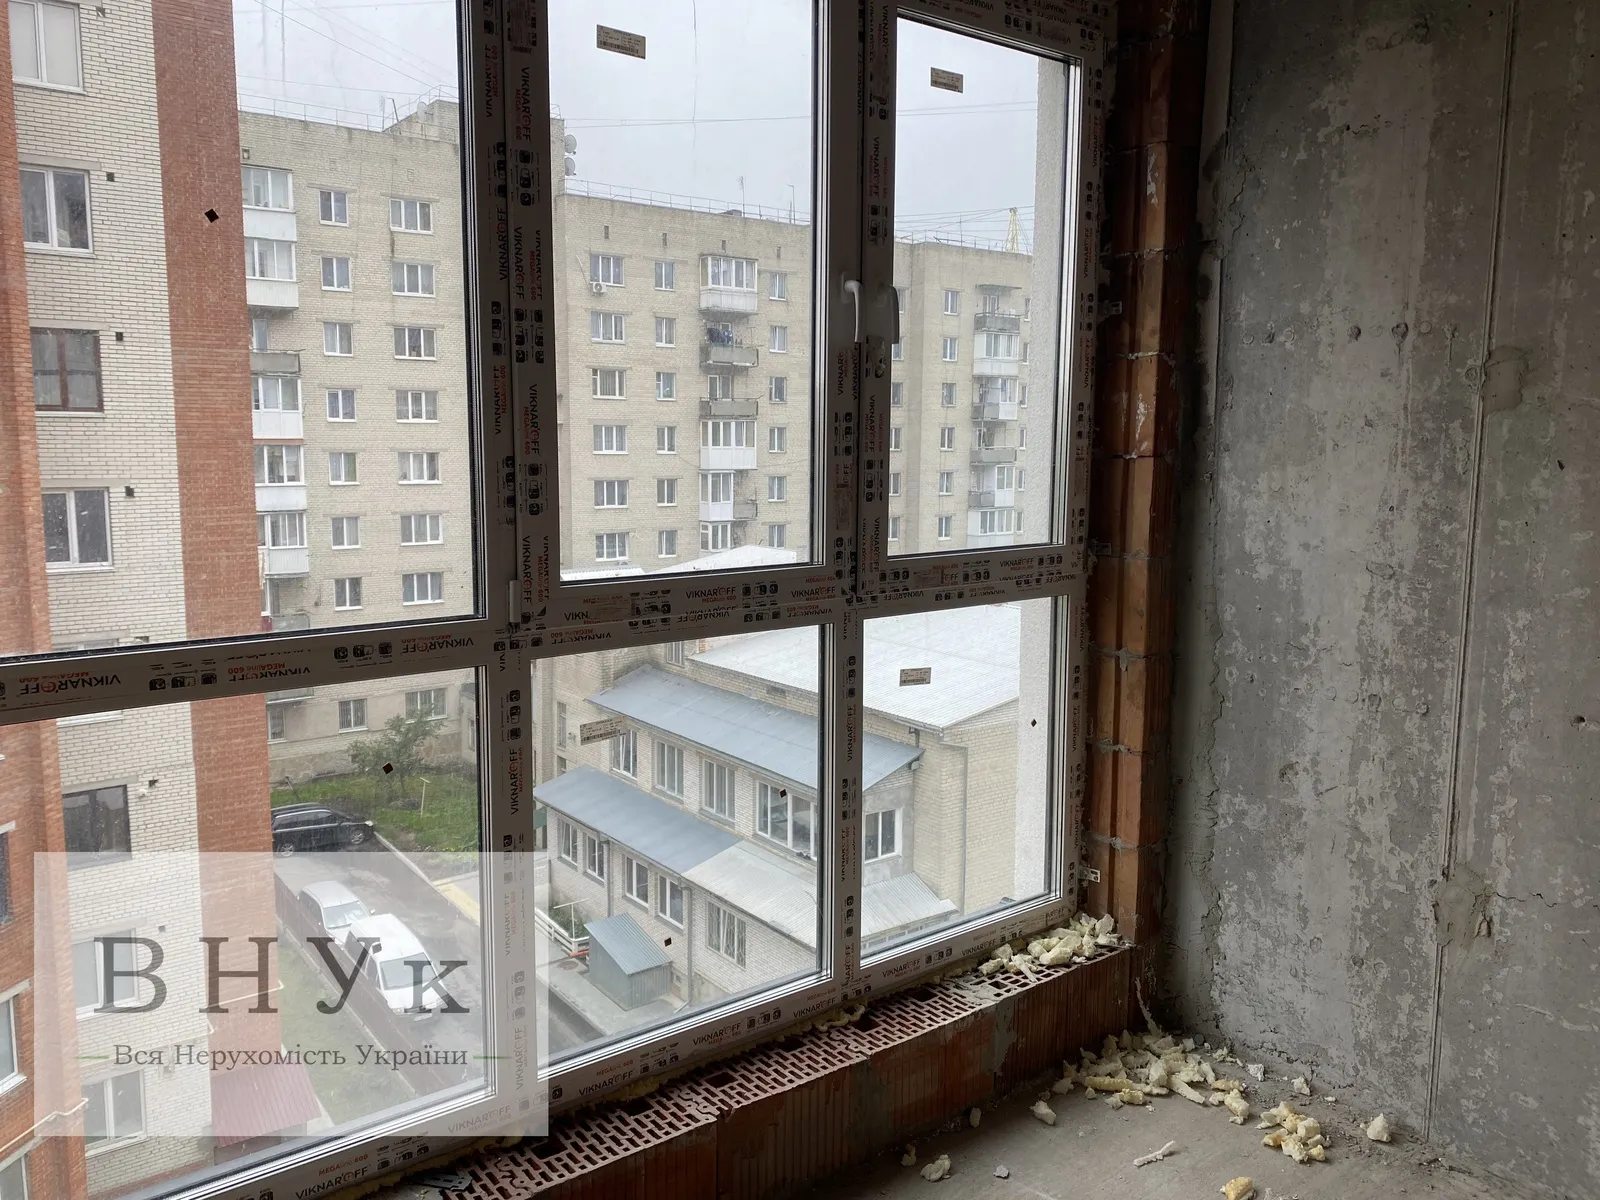 Apartments for sale. 2 rooms, 70 m², 6th floor/10 floors. Smakuly vul., Ternopil. 